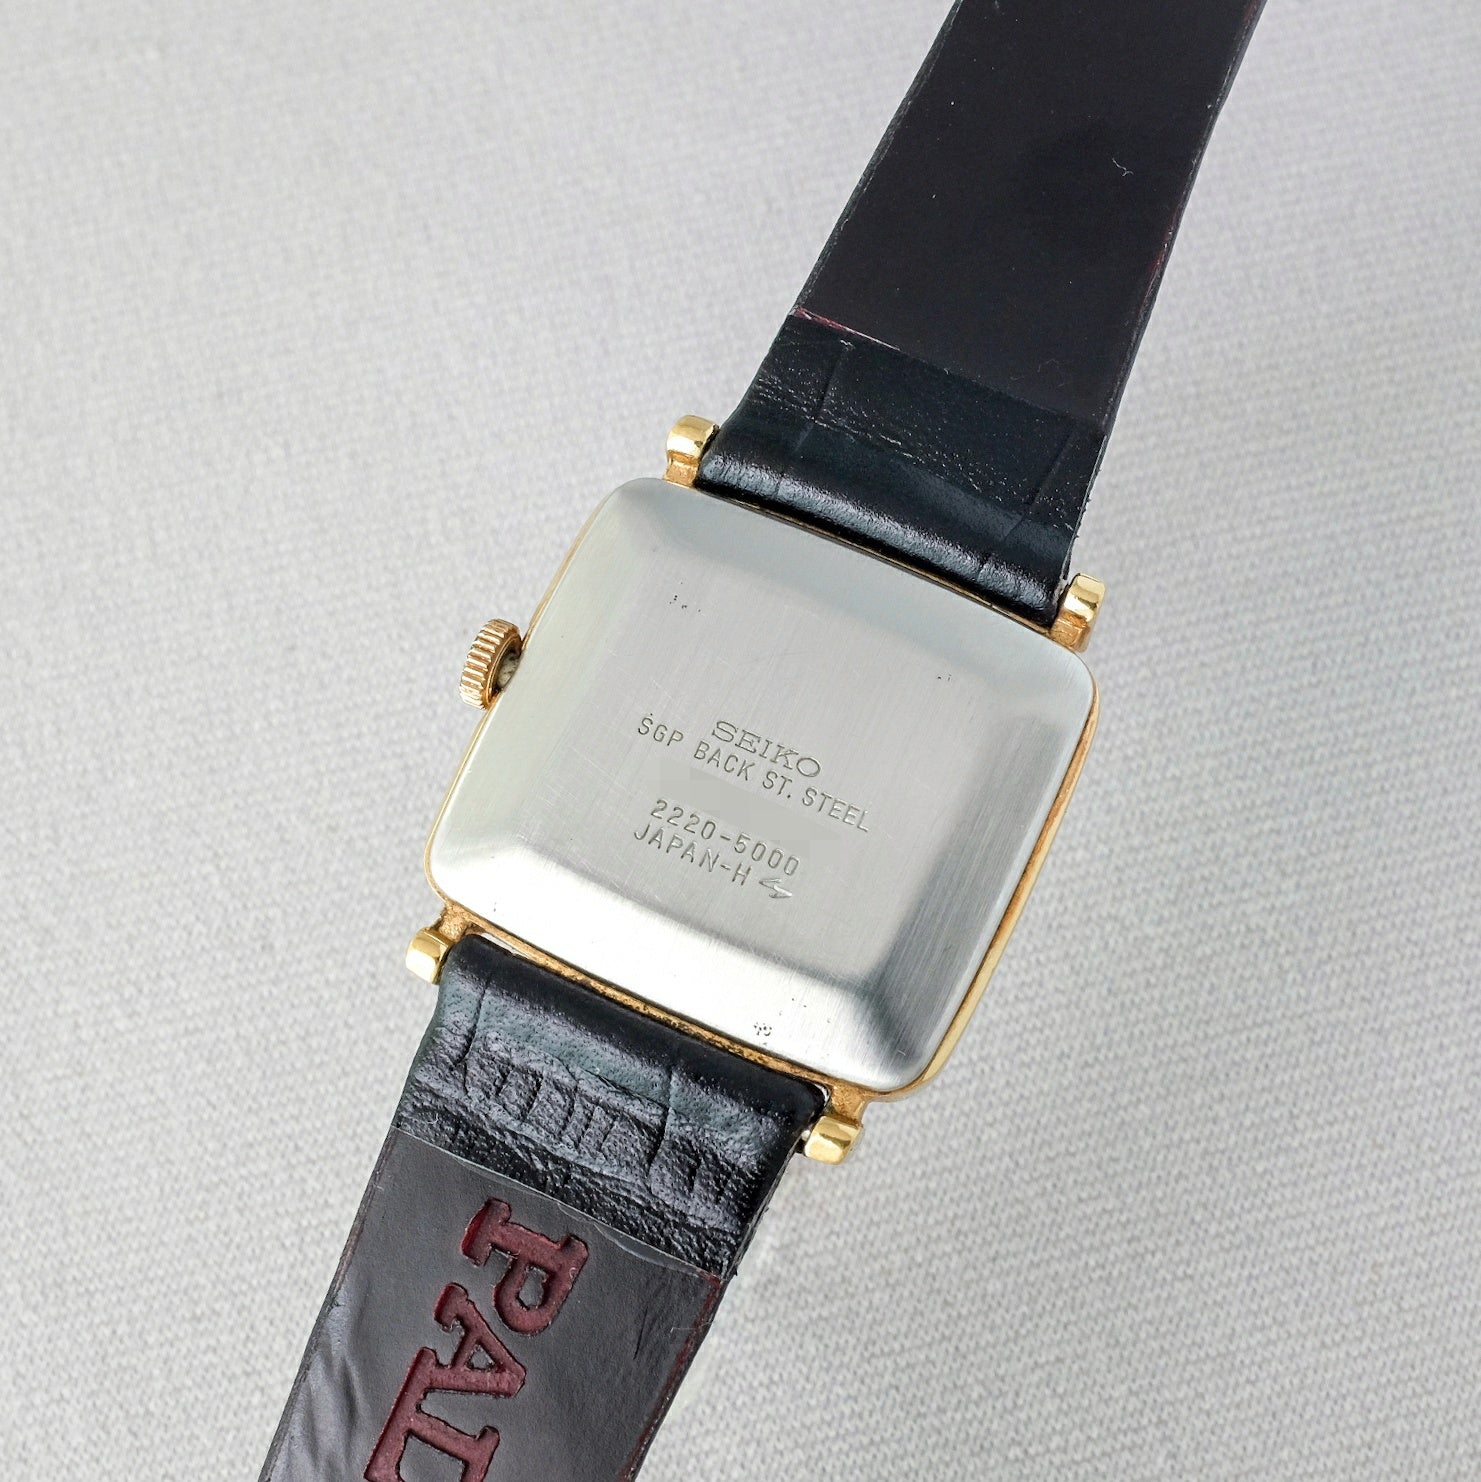 Seiko 2220-5000 from 1977 (Serviced)